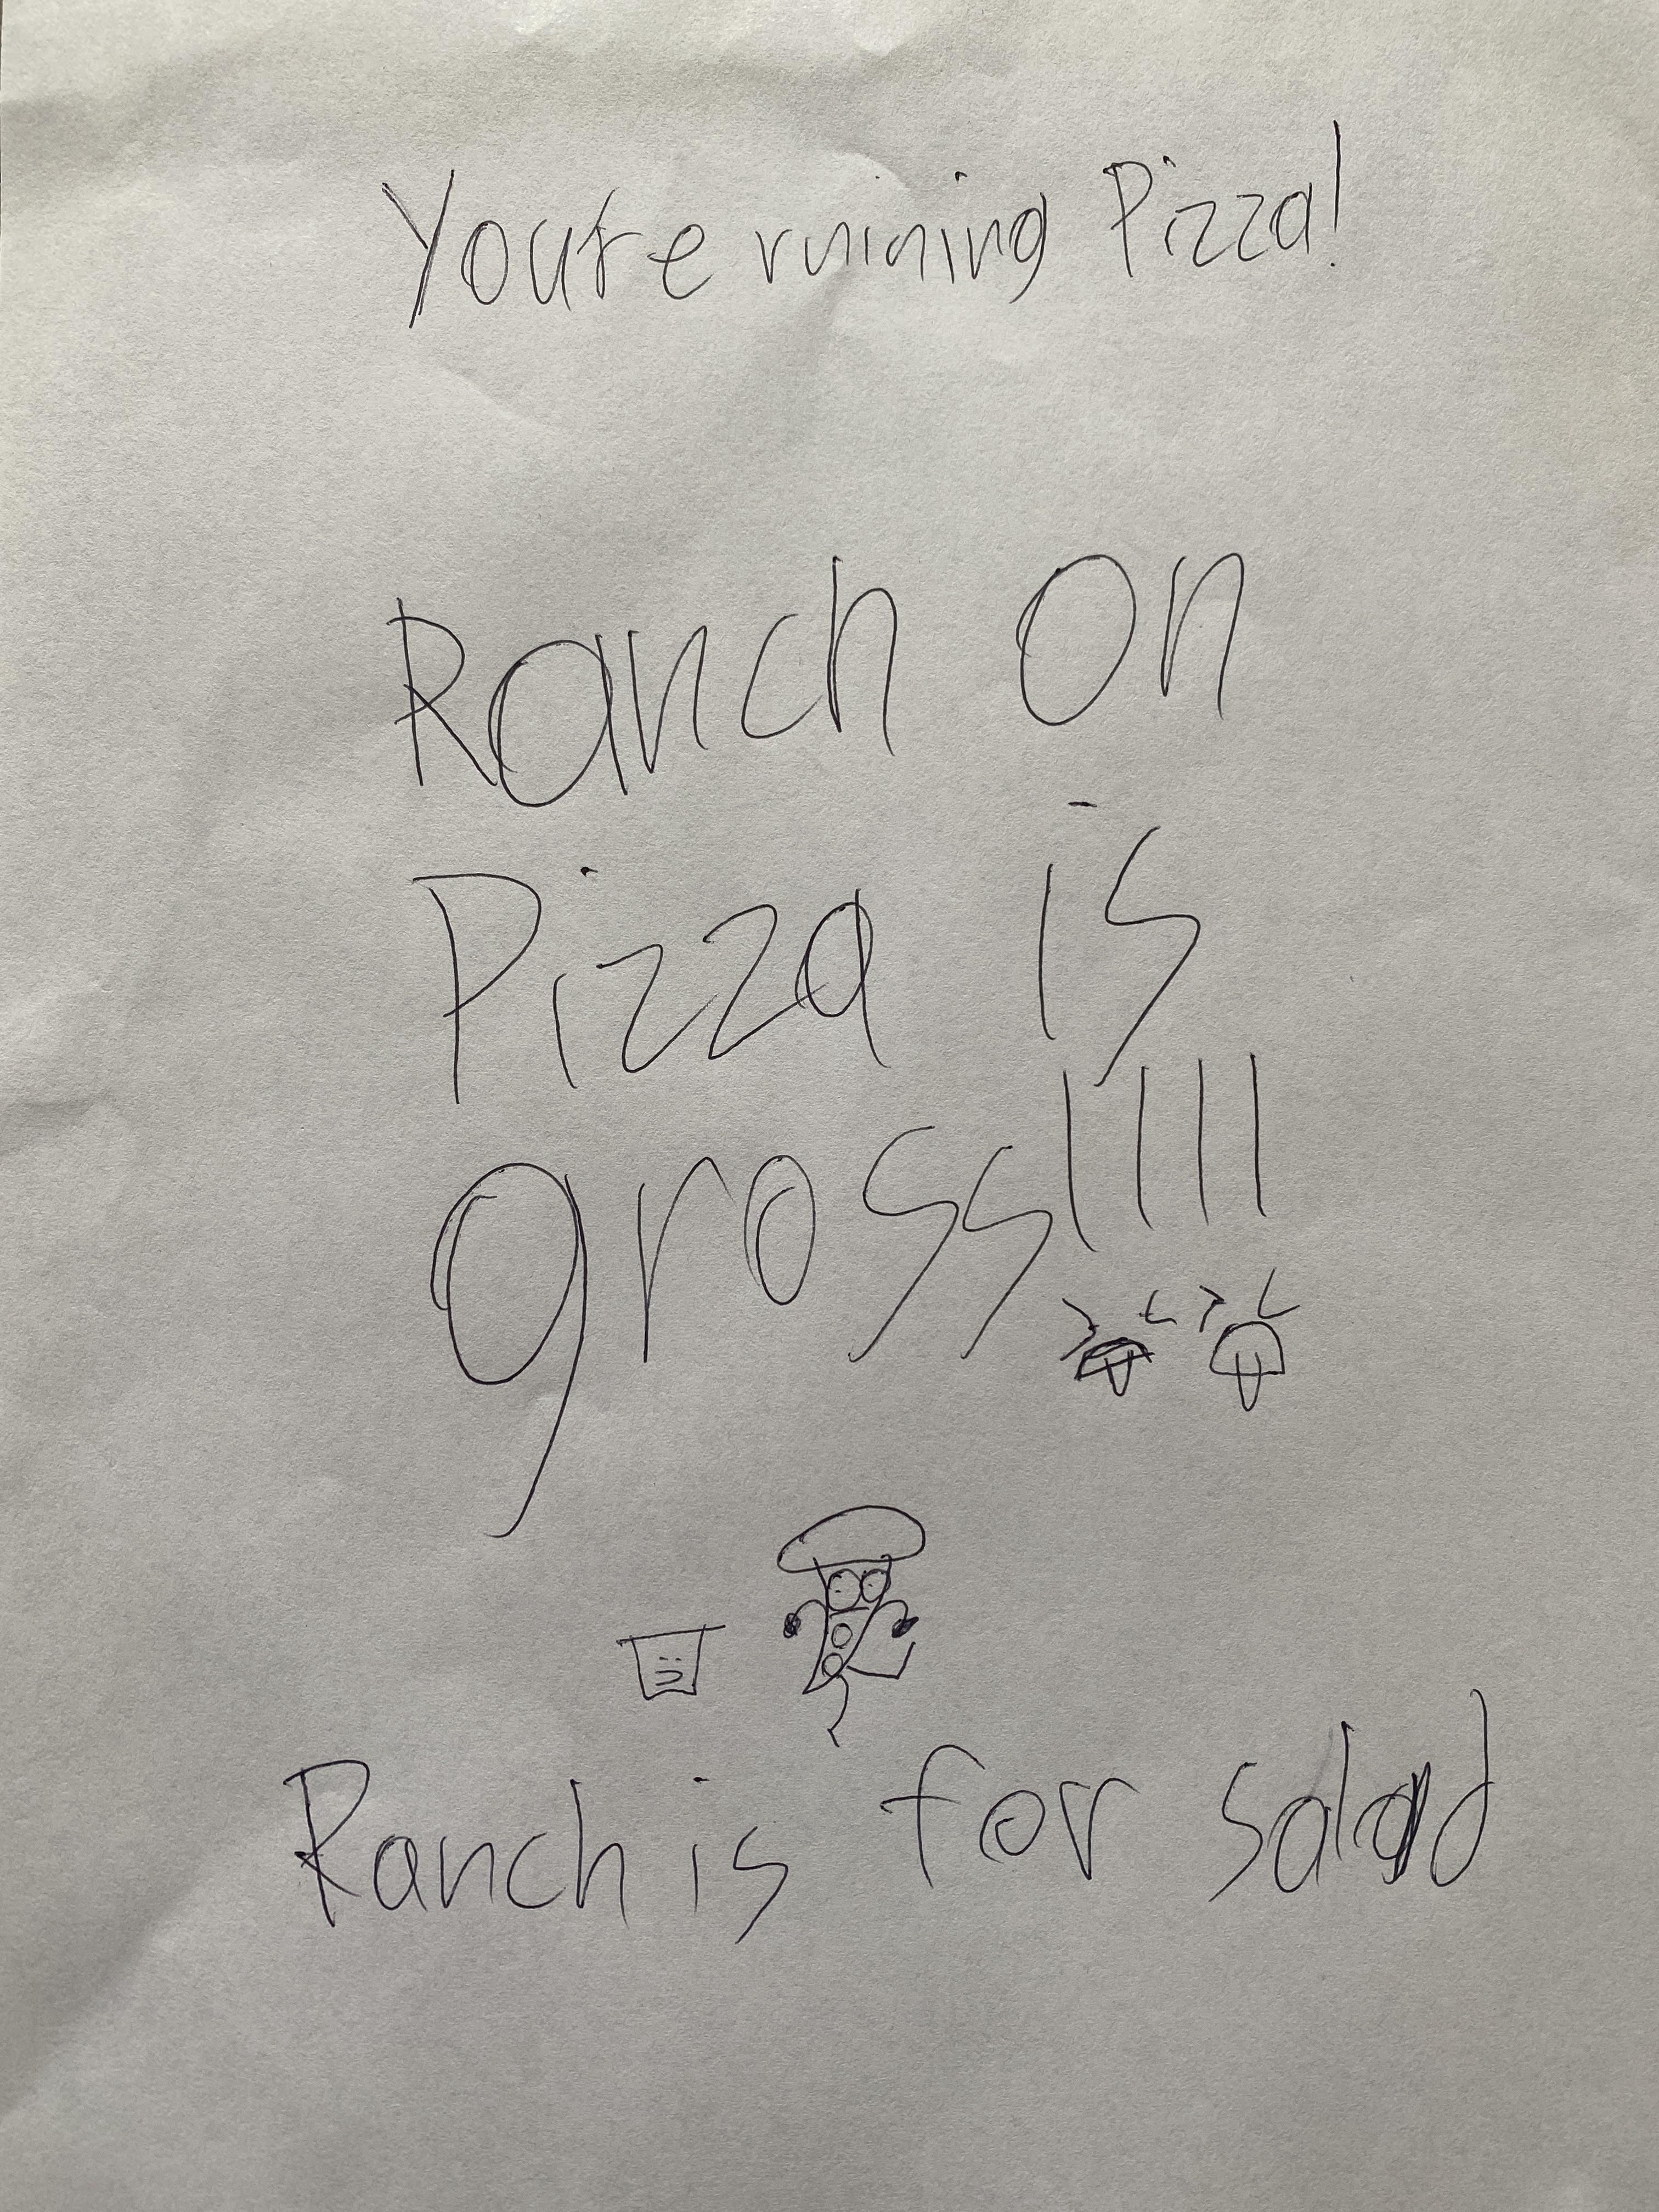 My 9yr old son’s view on pizza…